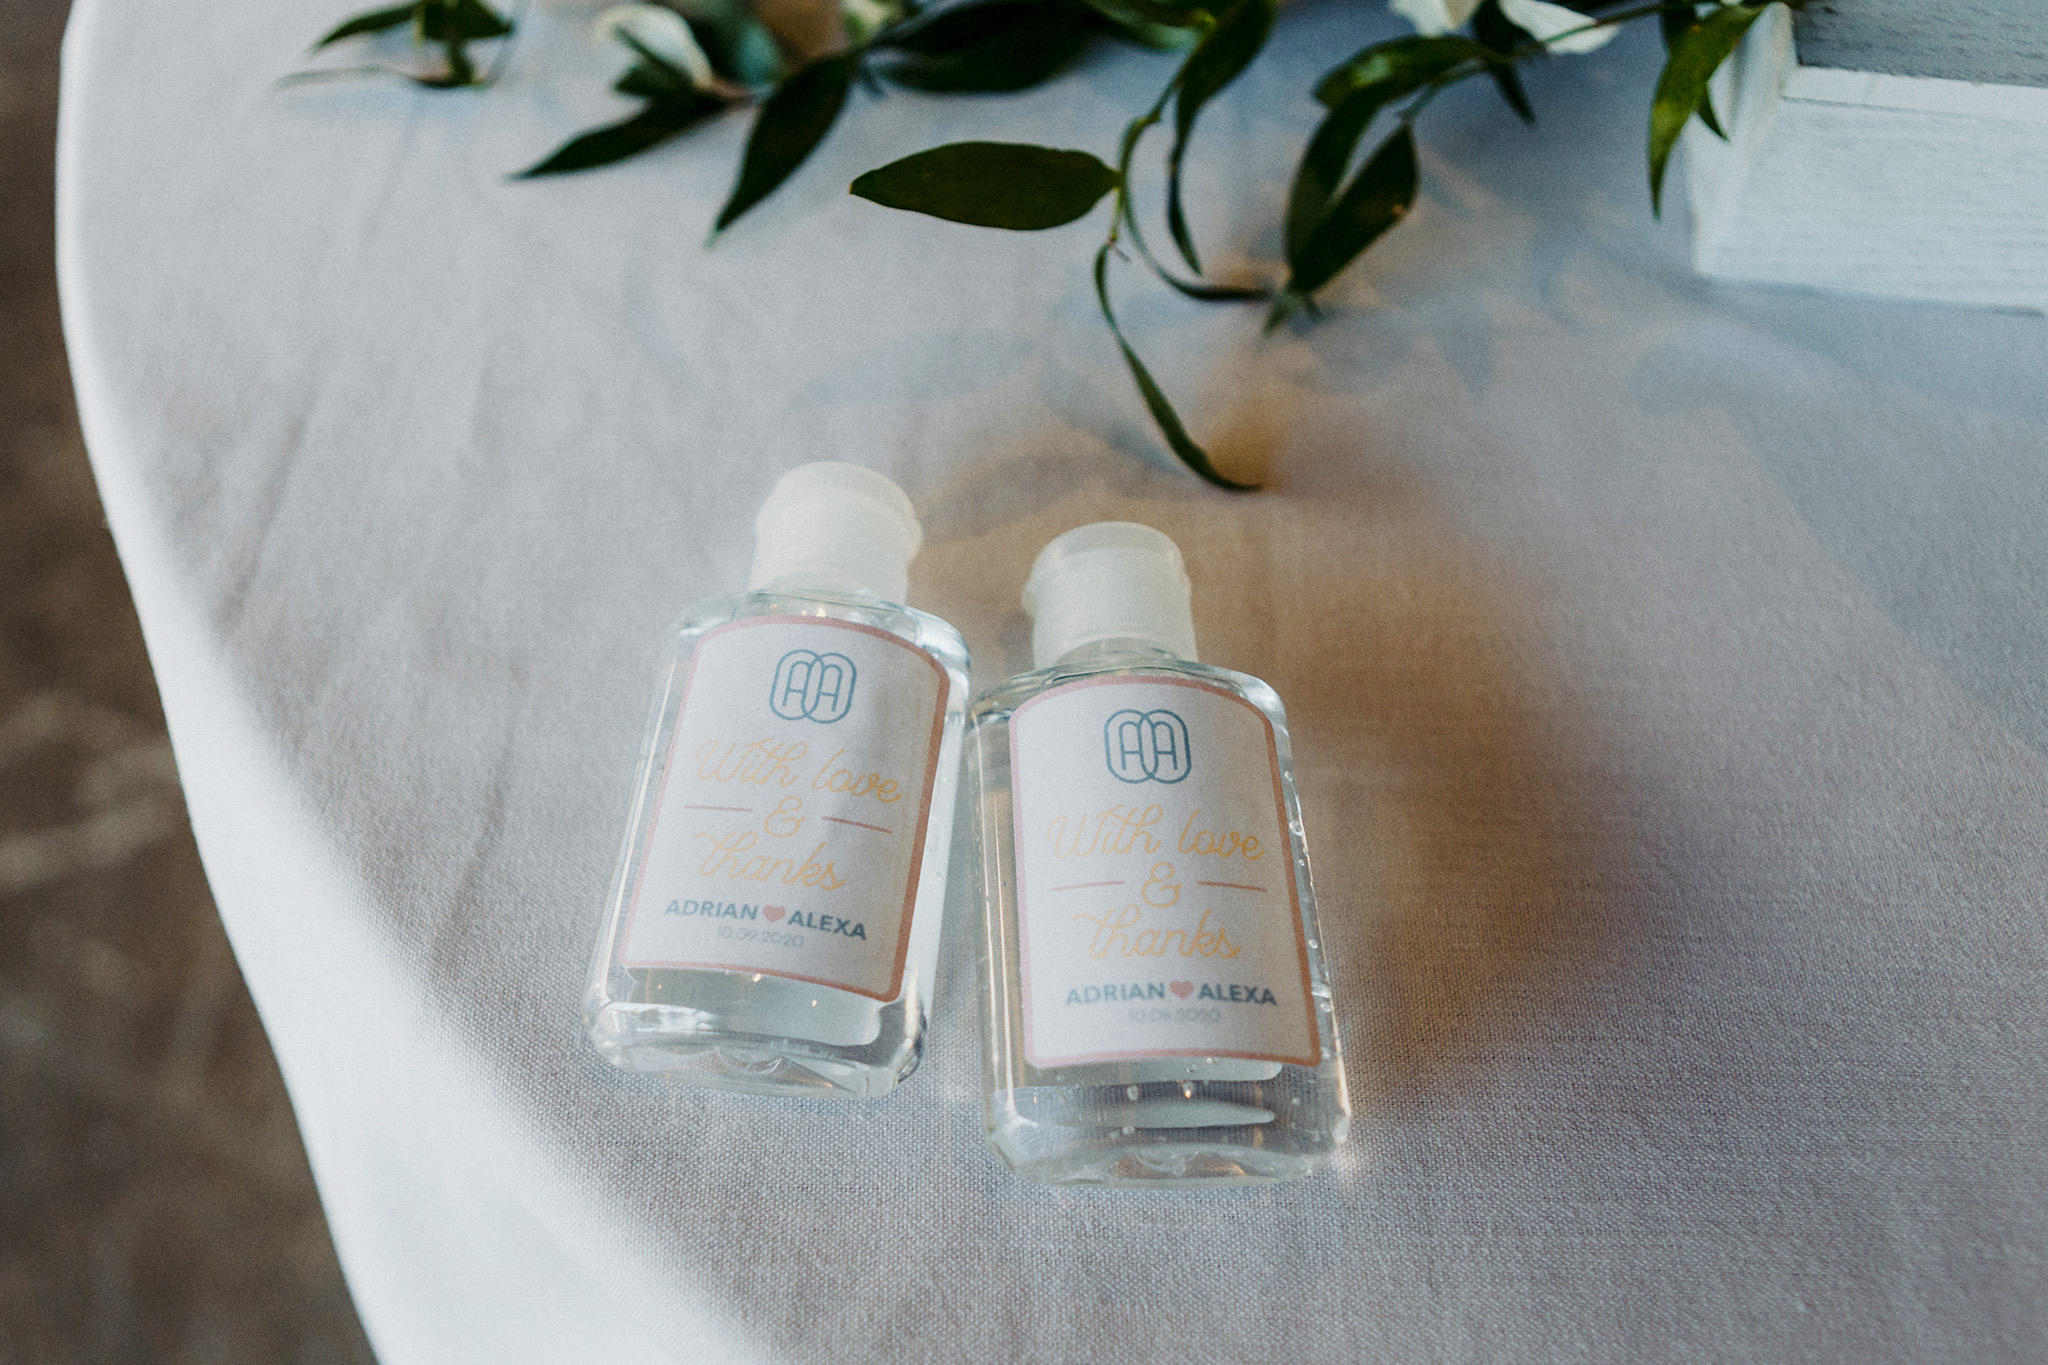 Custom hand sanitizer as favors at a wedding